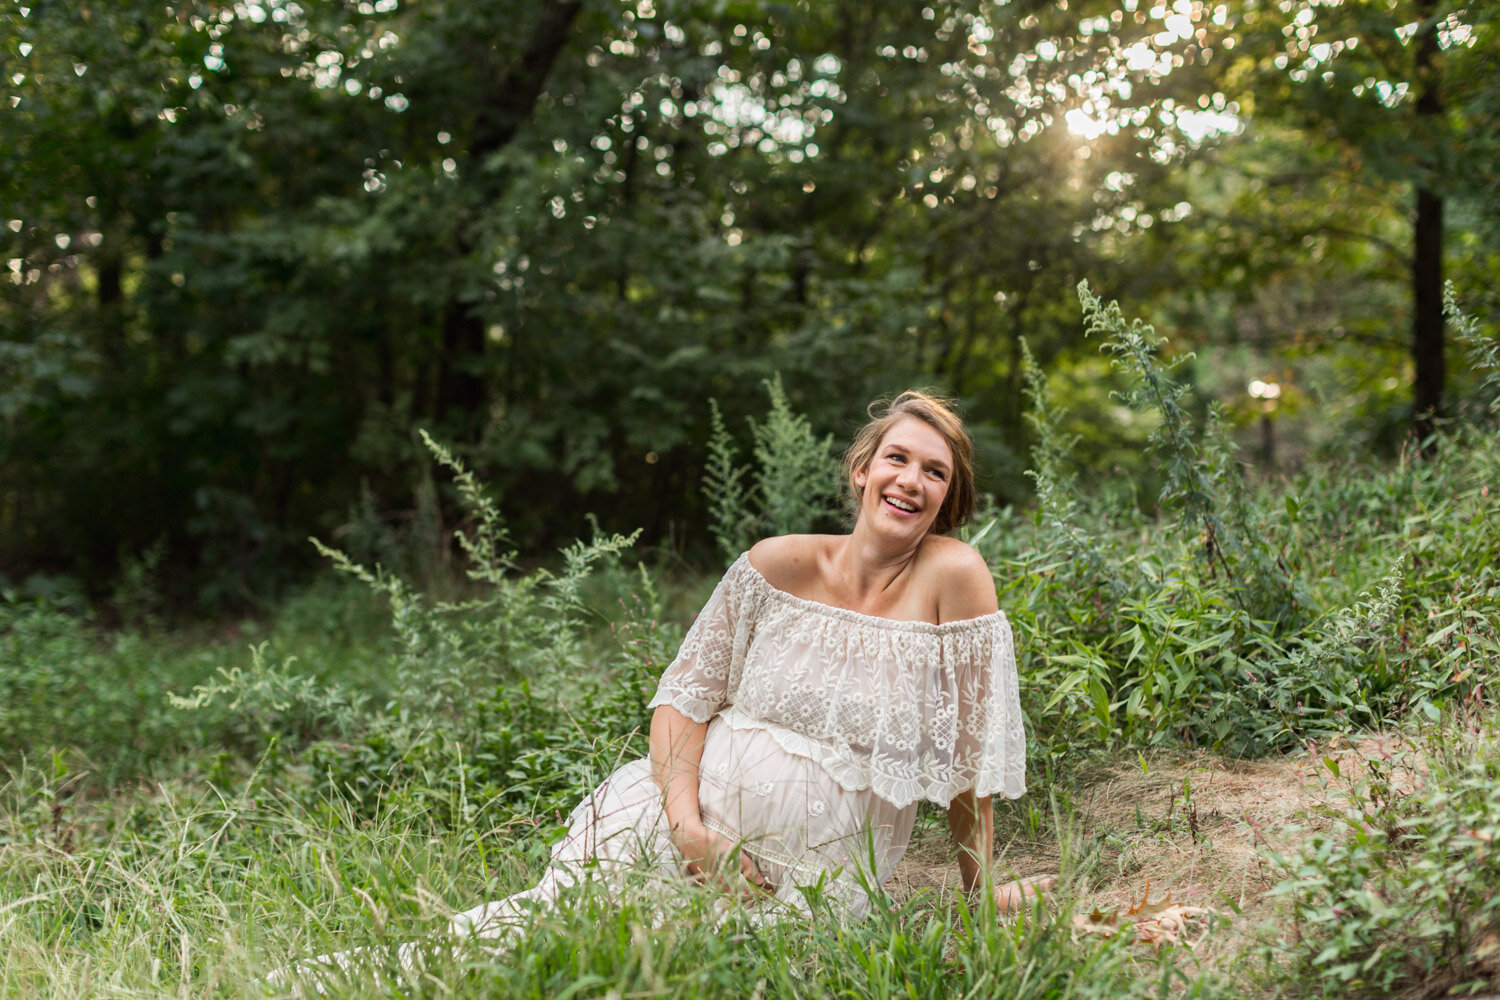 Central_Park_Maternity_Session_with_NYC_Baby_Photographer_Nicole_Hawkins_Photography_September_2019_Lara-5.jpg